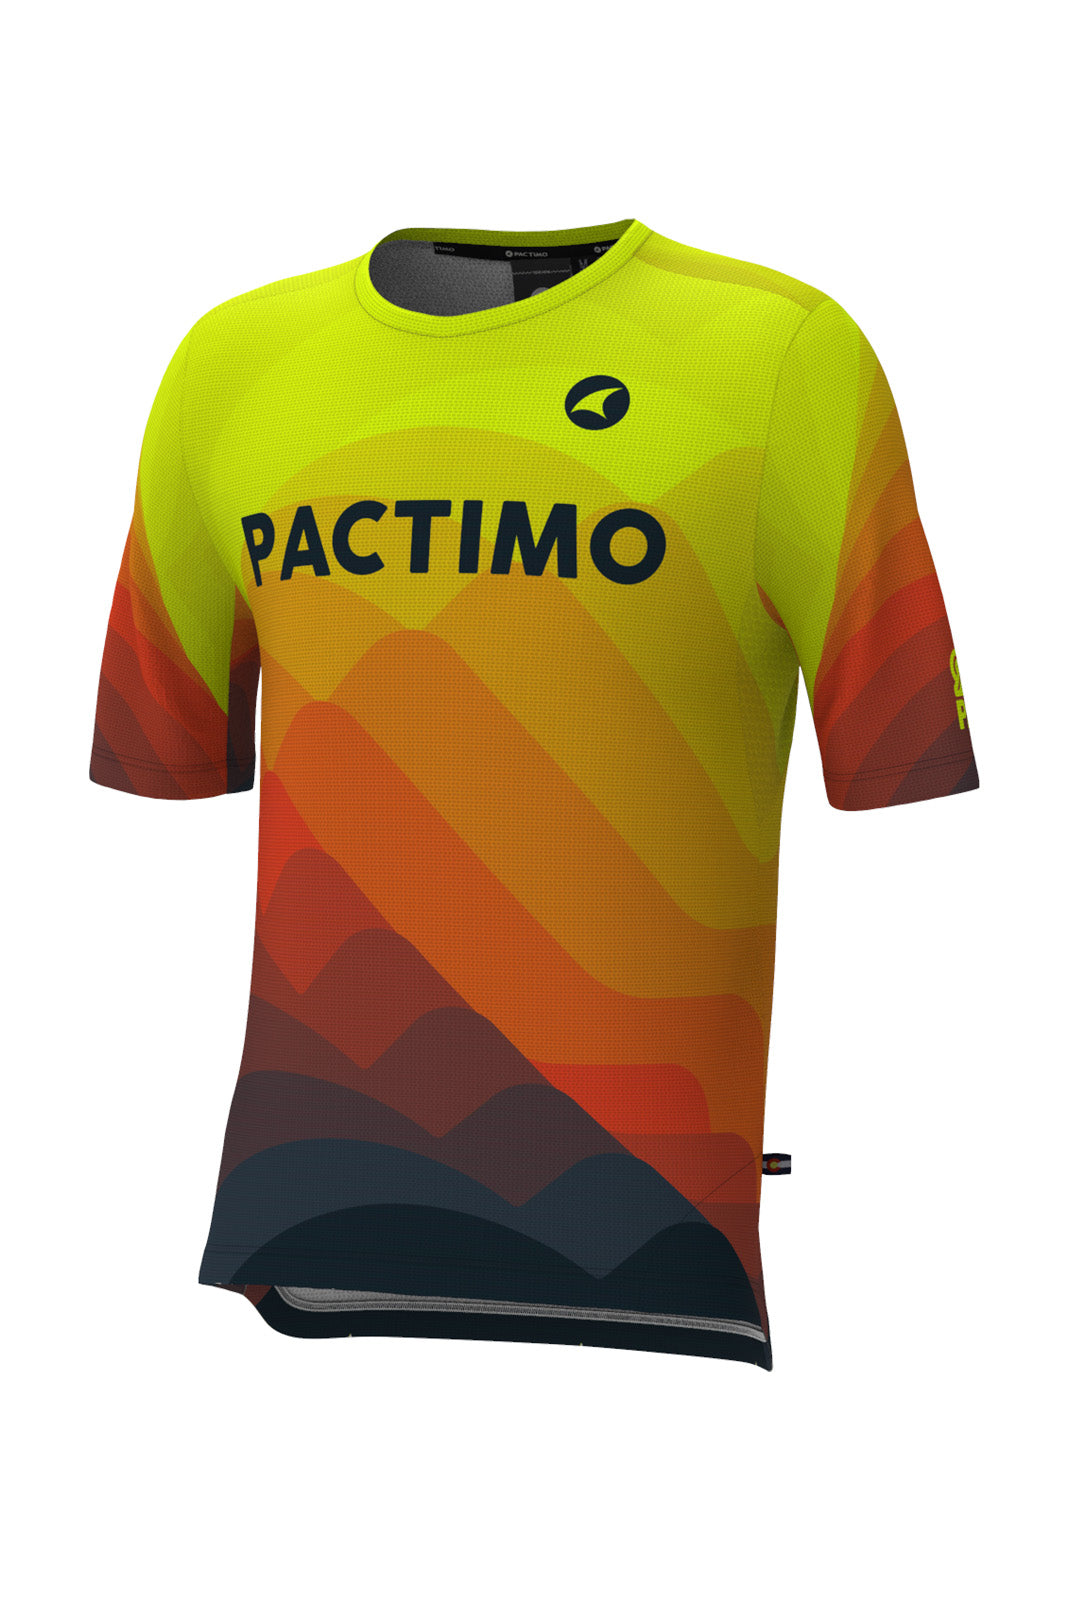 Women's Range Trail Lite LS Tee in Honeycomb | Size: XL by Pactimo